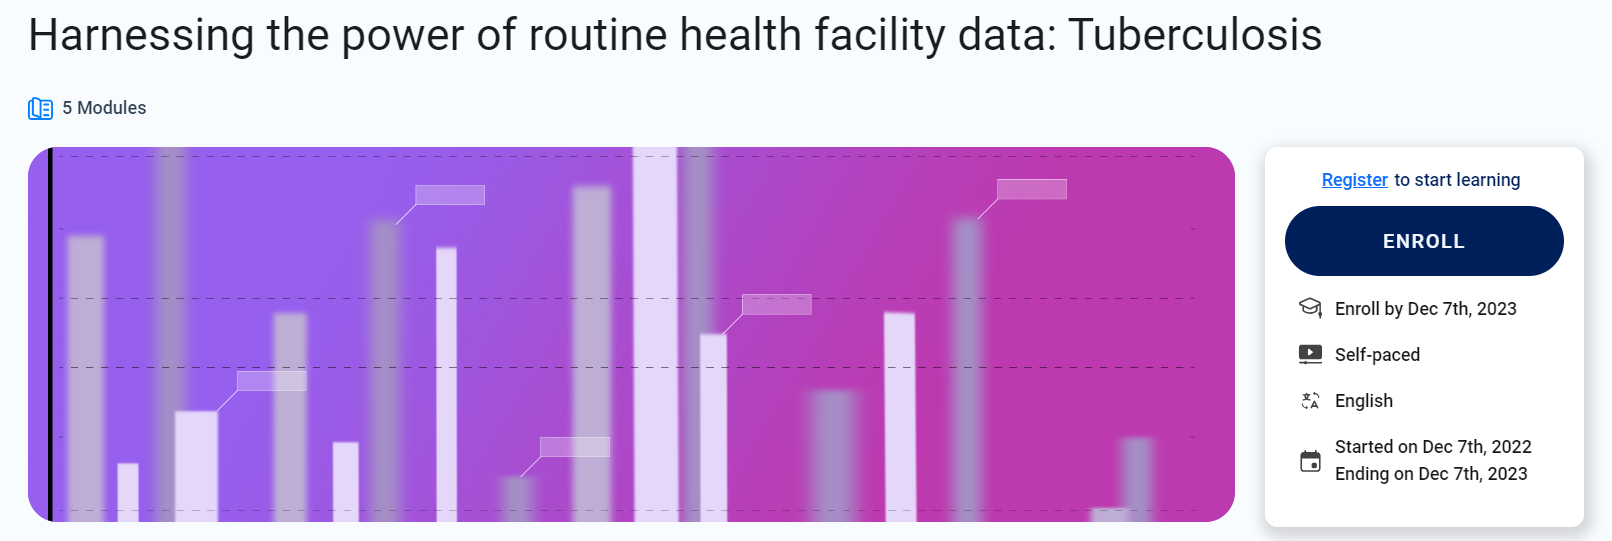 Harnessing the power of routine health facility data: Tuberculosis